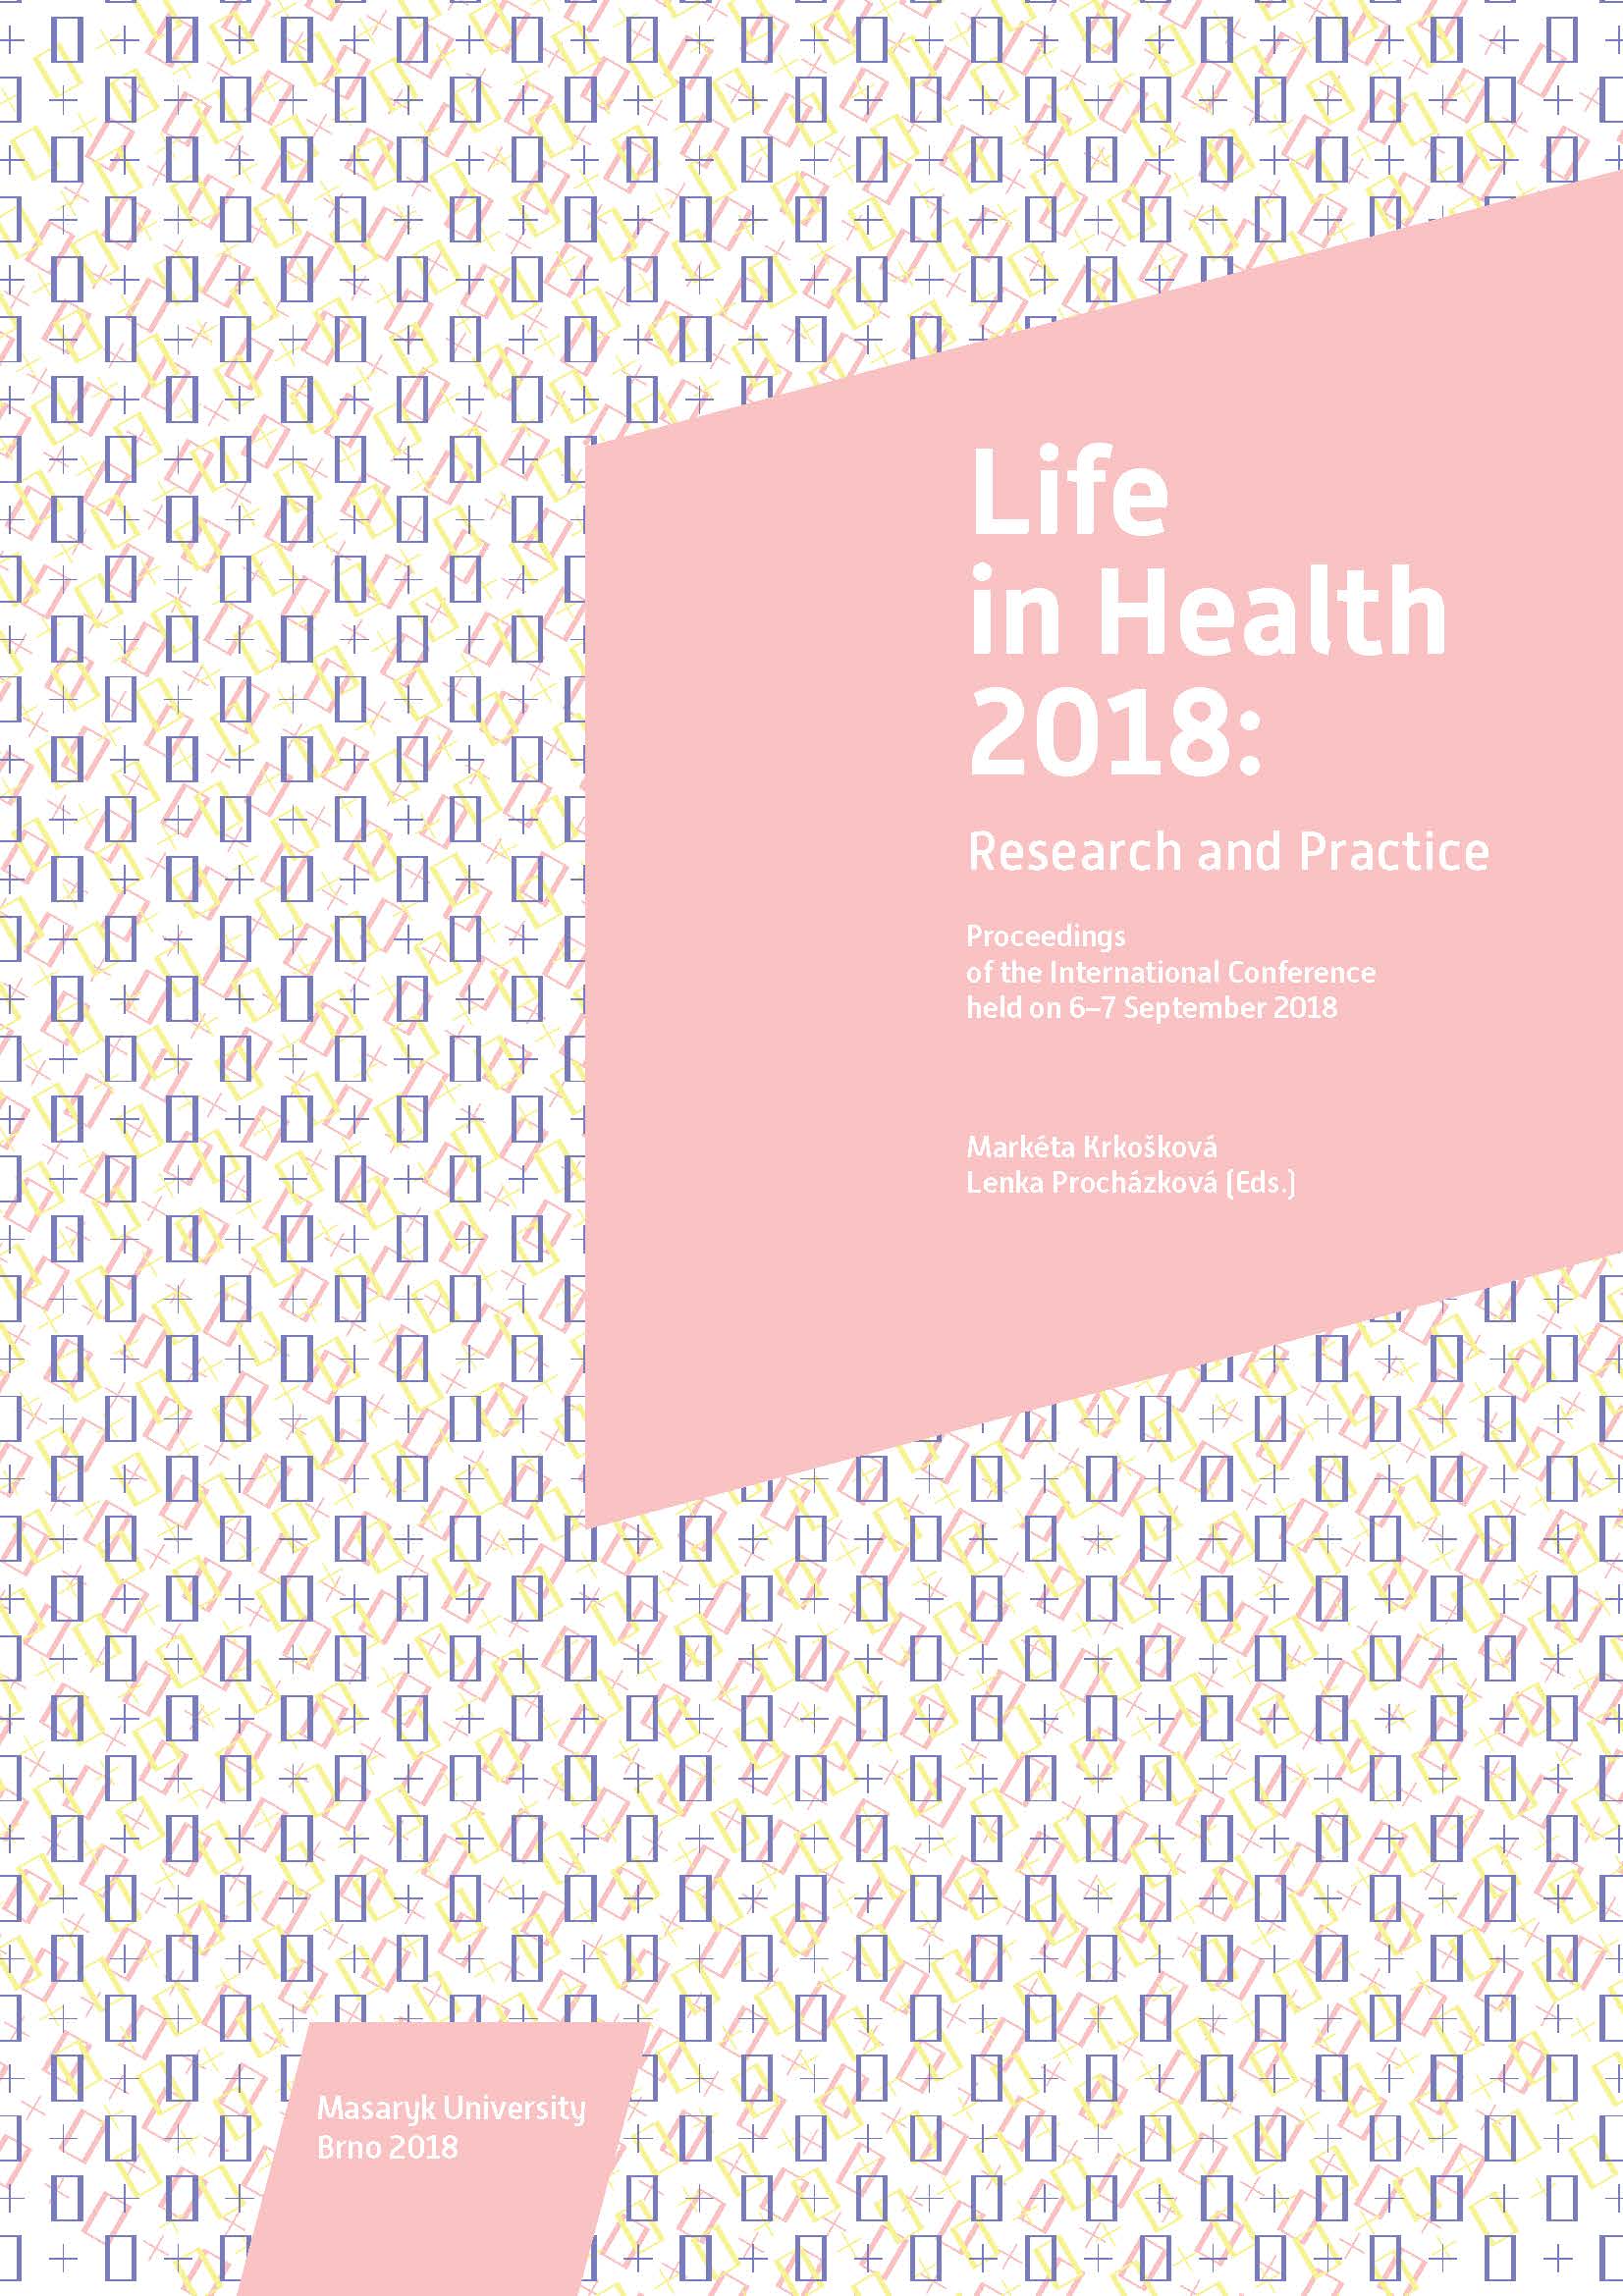 Obálka pro Life in Health 2018: Research and Practice. Proceedings of the International Conference held on 6–7 September 2018